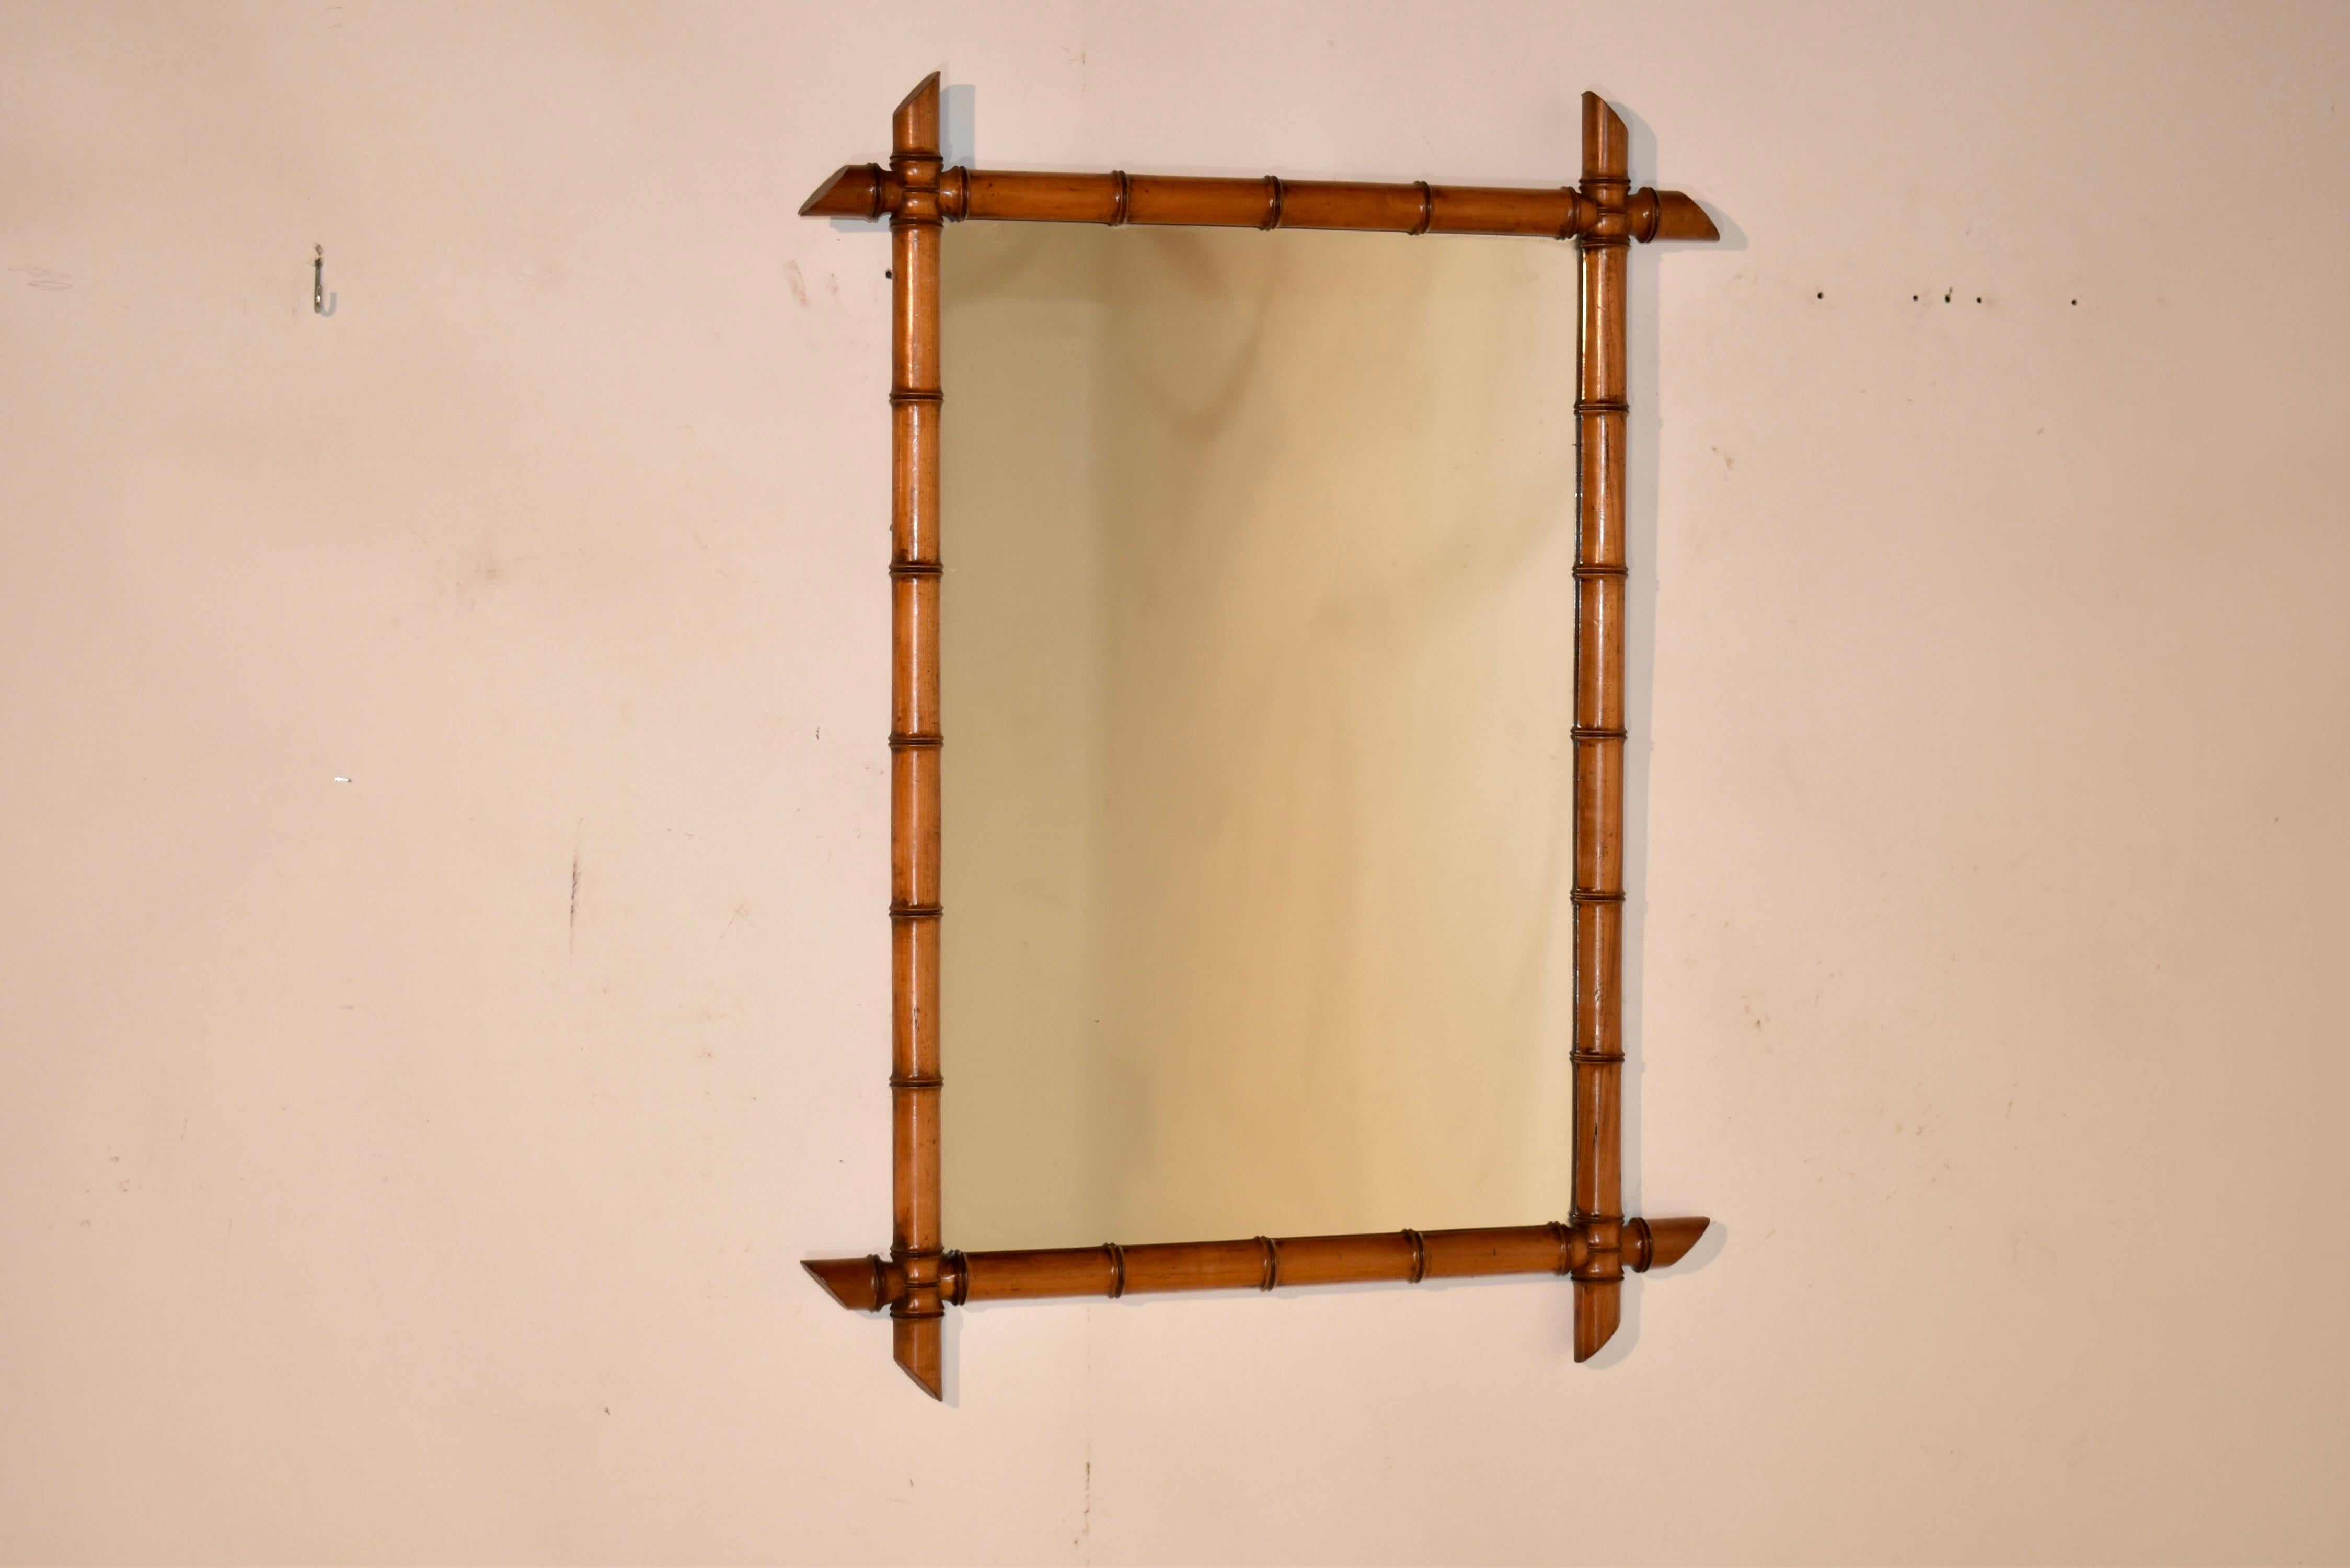 Late 19th century faux bamboo mirror made from cherry in France. The frame is hand turned to have the appearance of bamboo, but is made from rich cherry and retains its original color and patina. The corners of the frame intersect and surround a